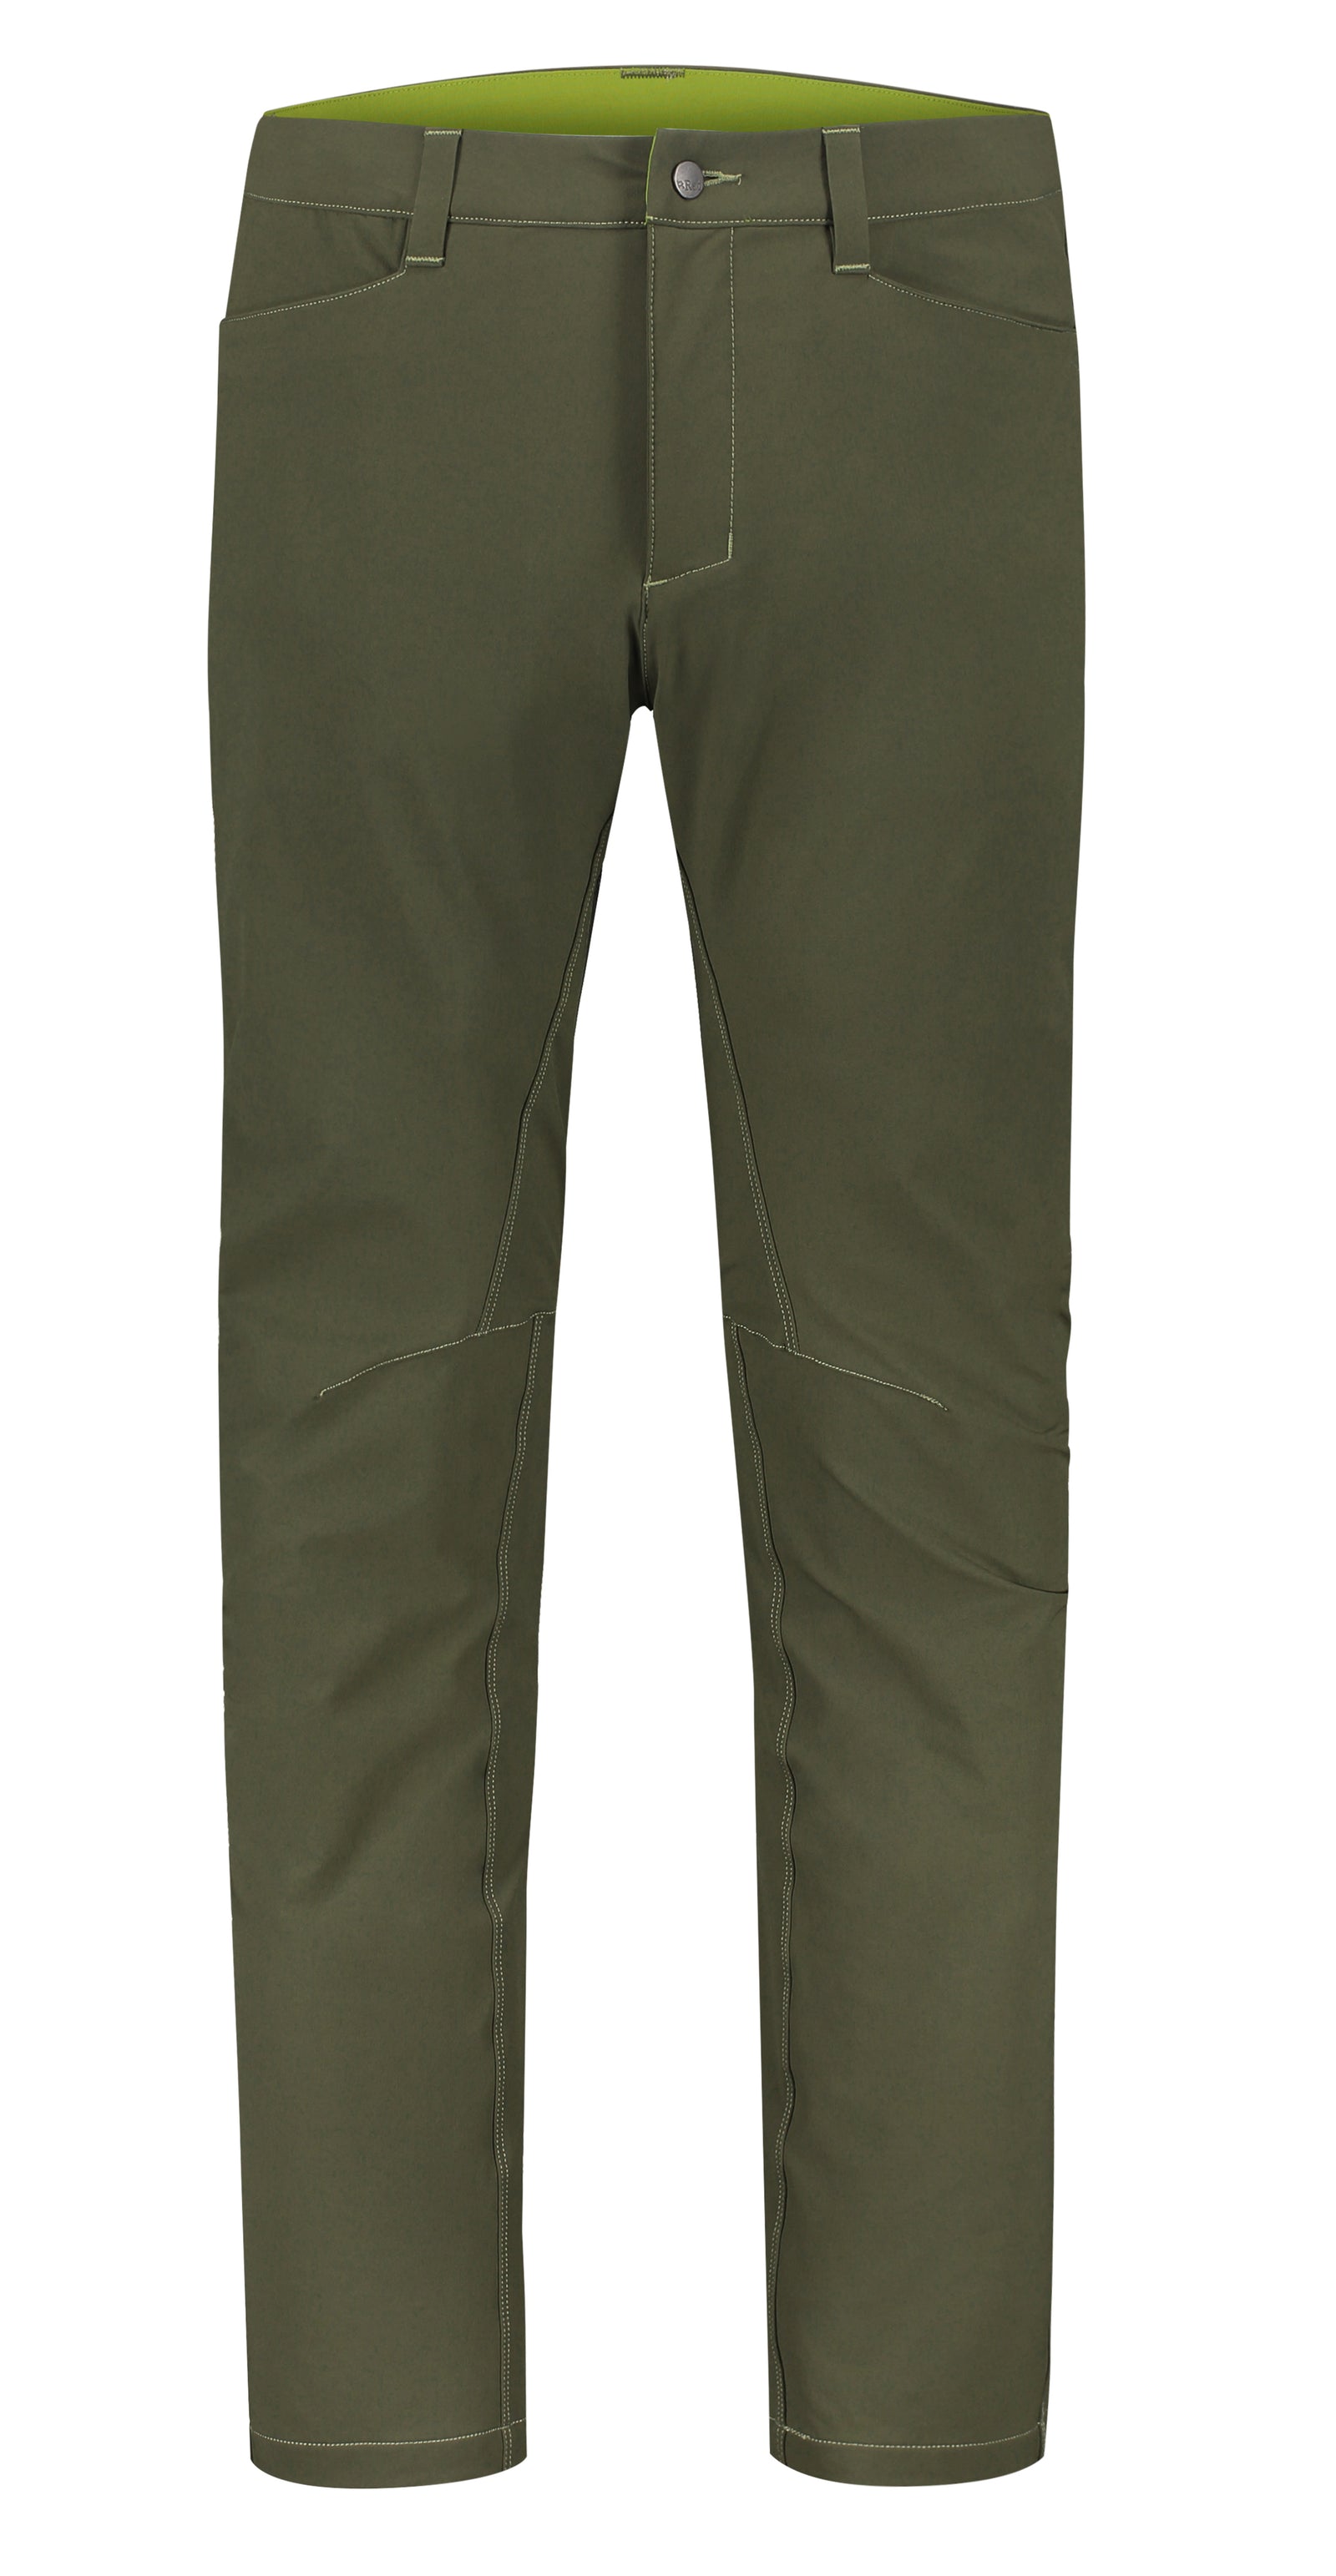 Men's Incline AS Softshell Pants